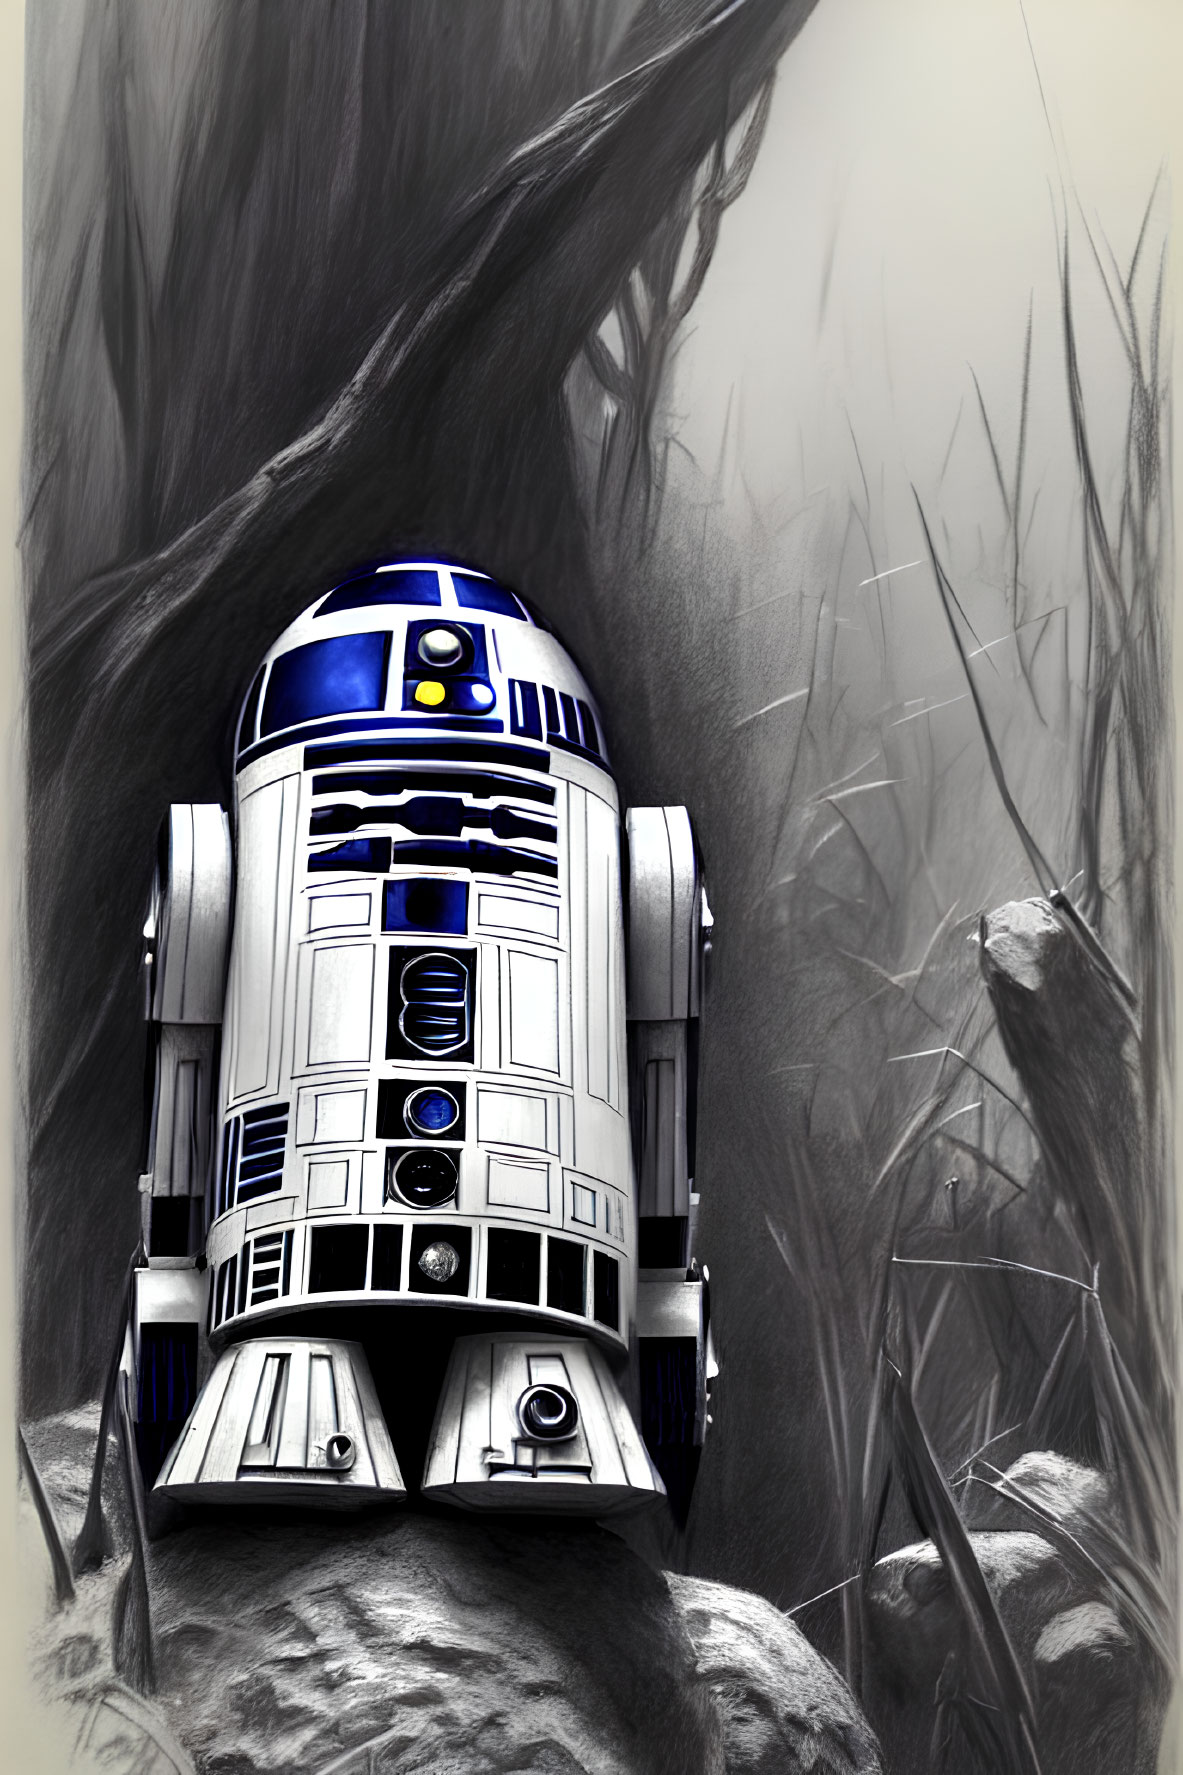 Monochromatic illustration of R2-D2 among rocks and grass